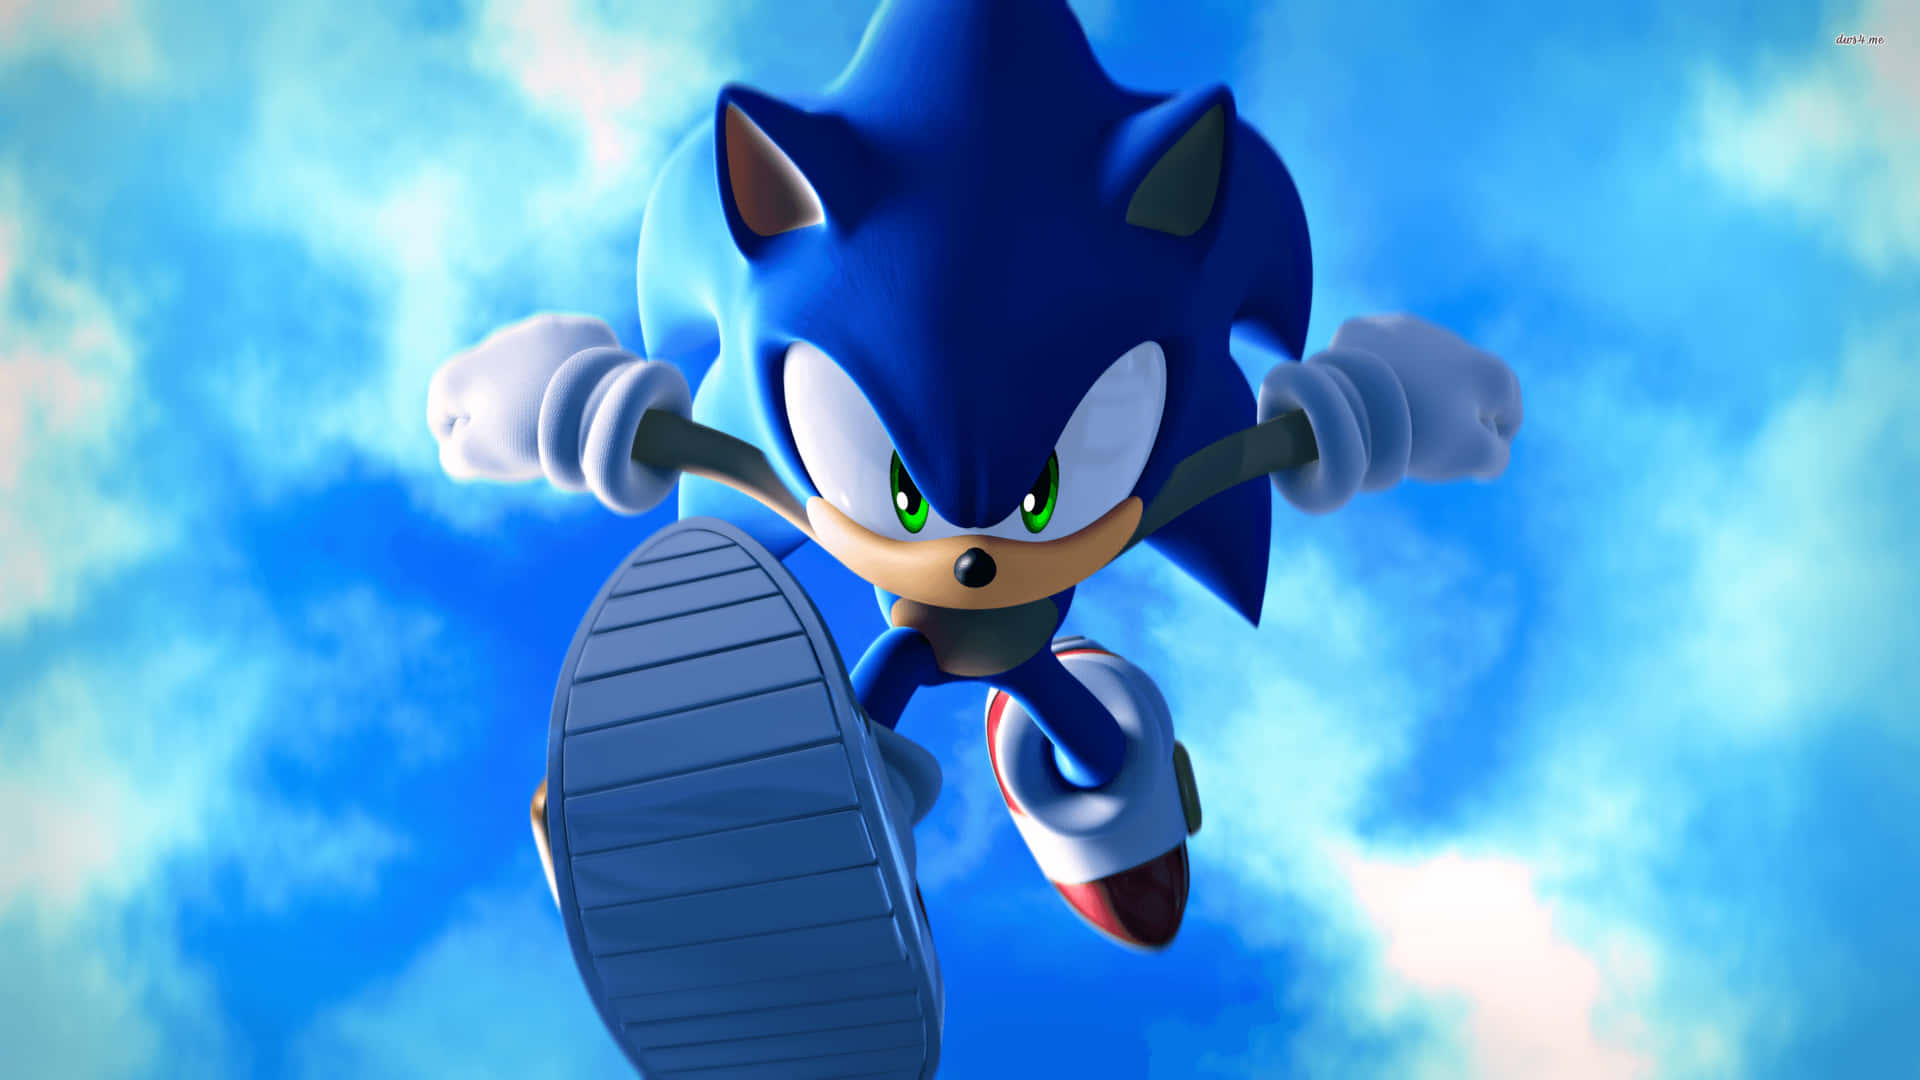 Feel the Speed With Sonic The Hedgehog 4K Wallpaper